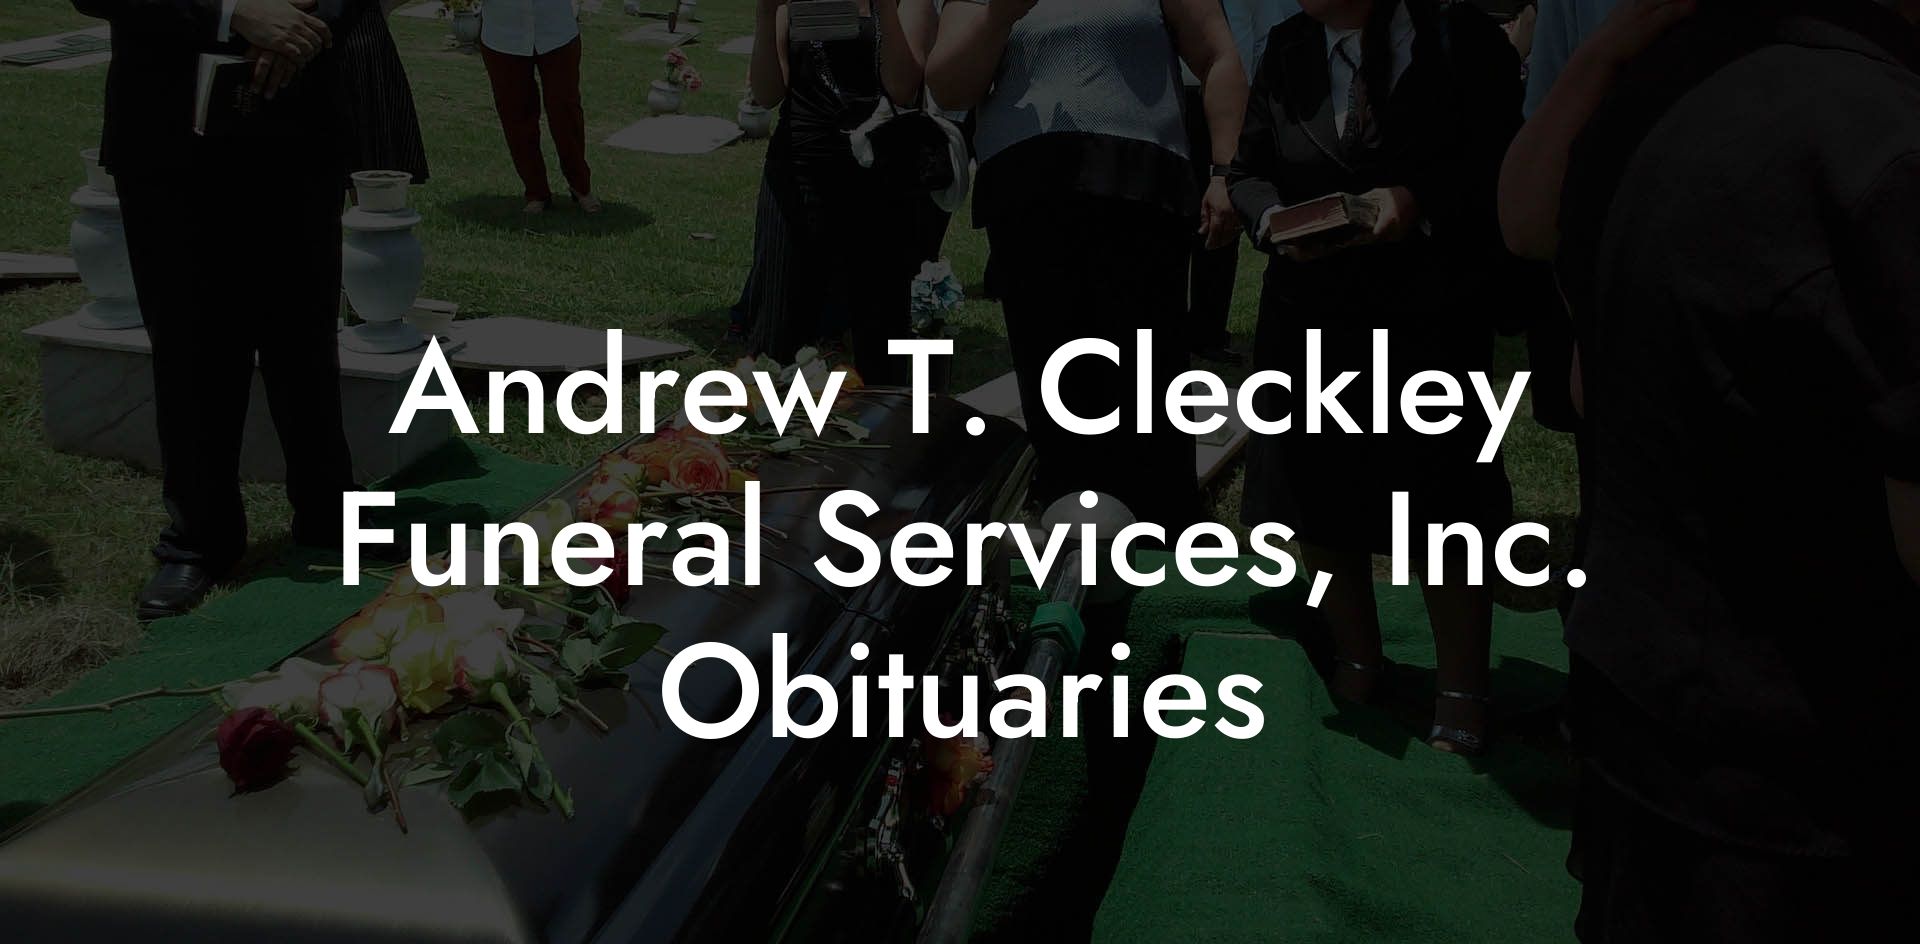 Andrew T. Cleckley Funeral Services, Inc. Obituaries